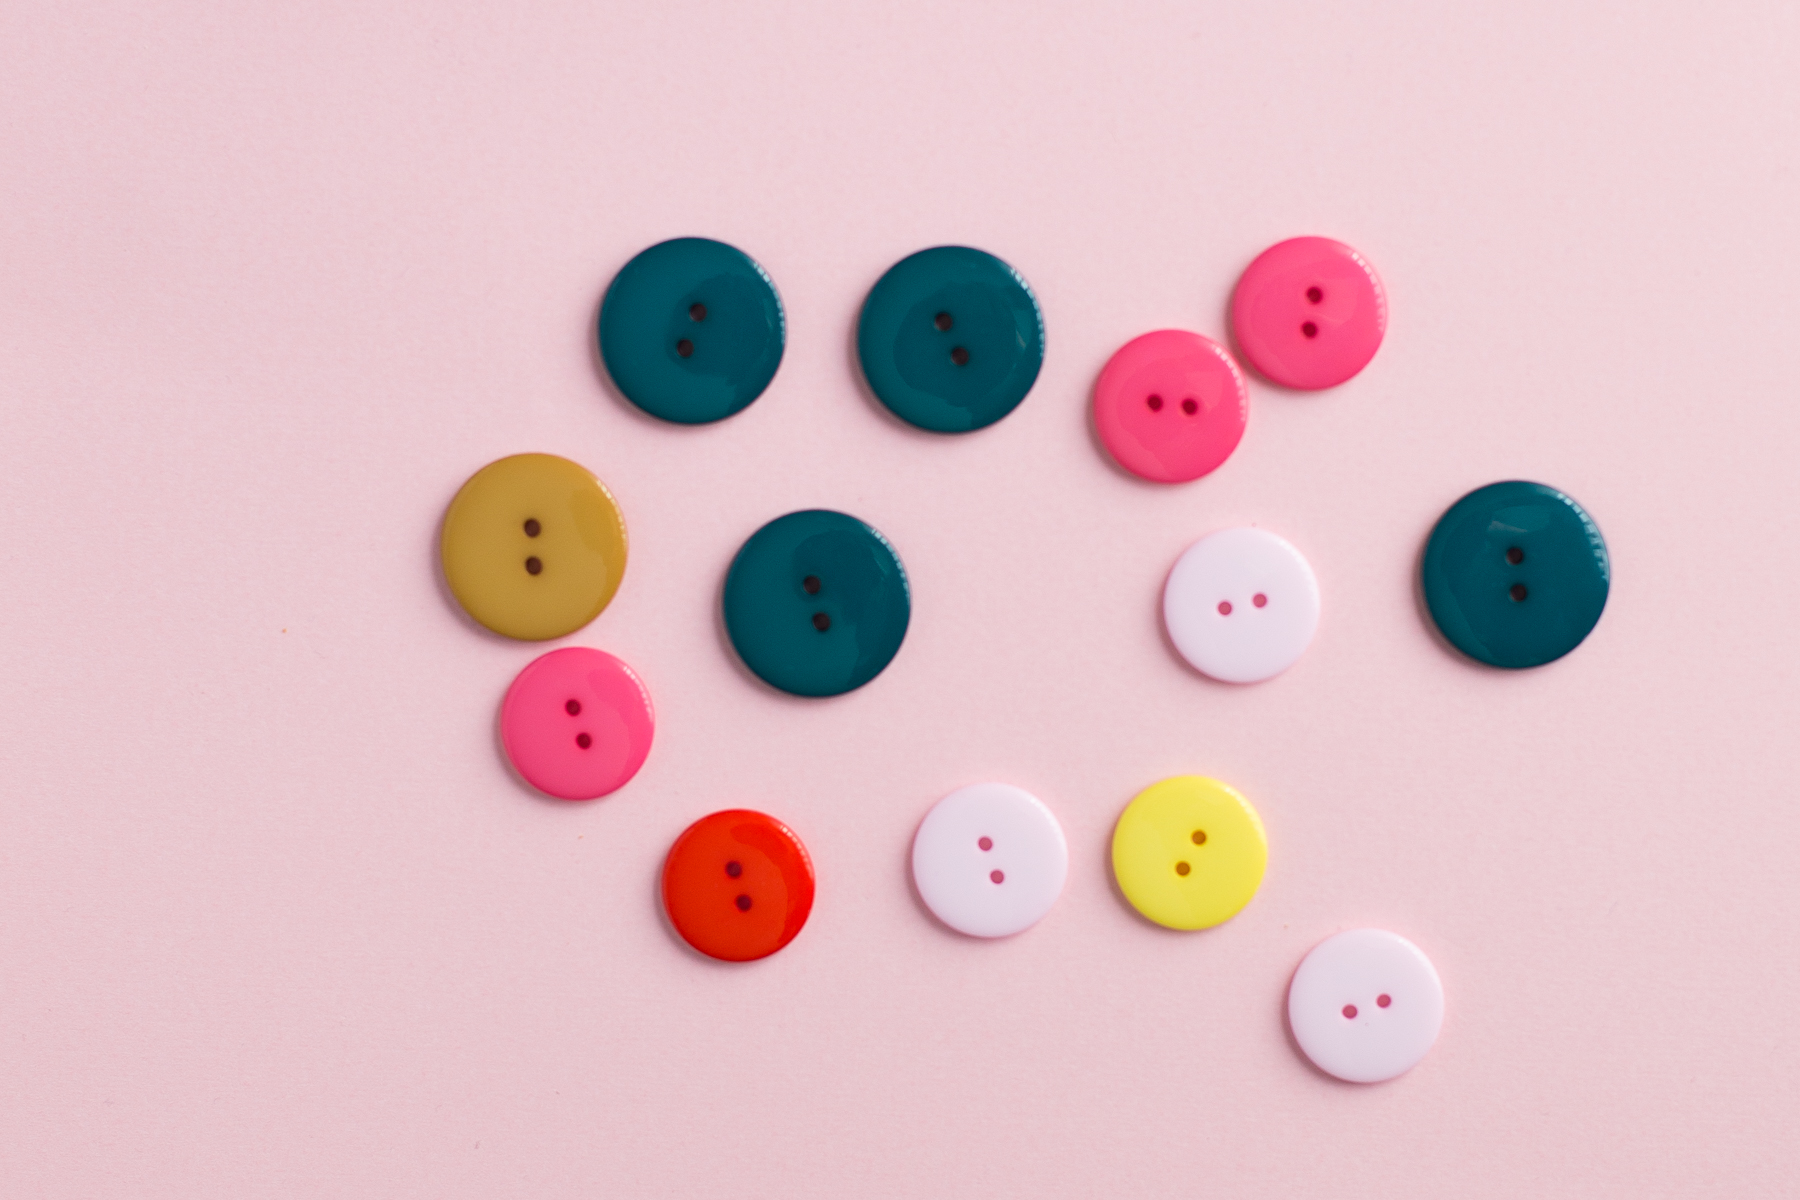 plastic buttons round knitting